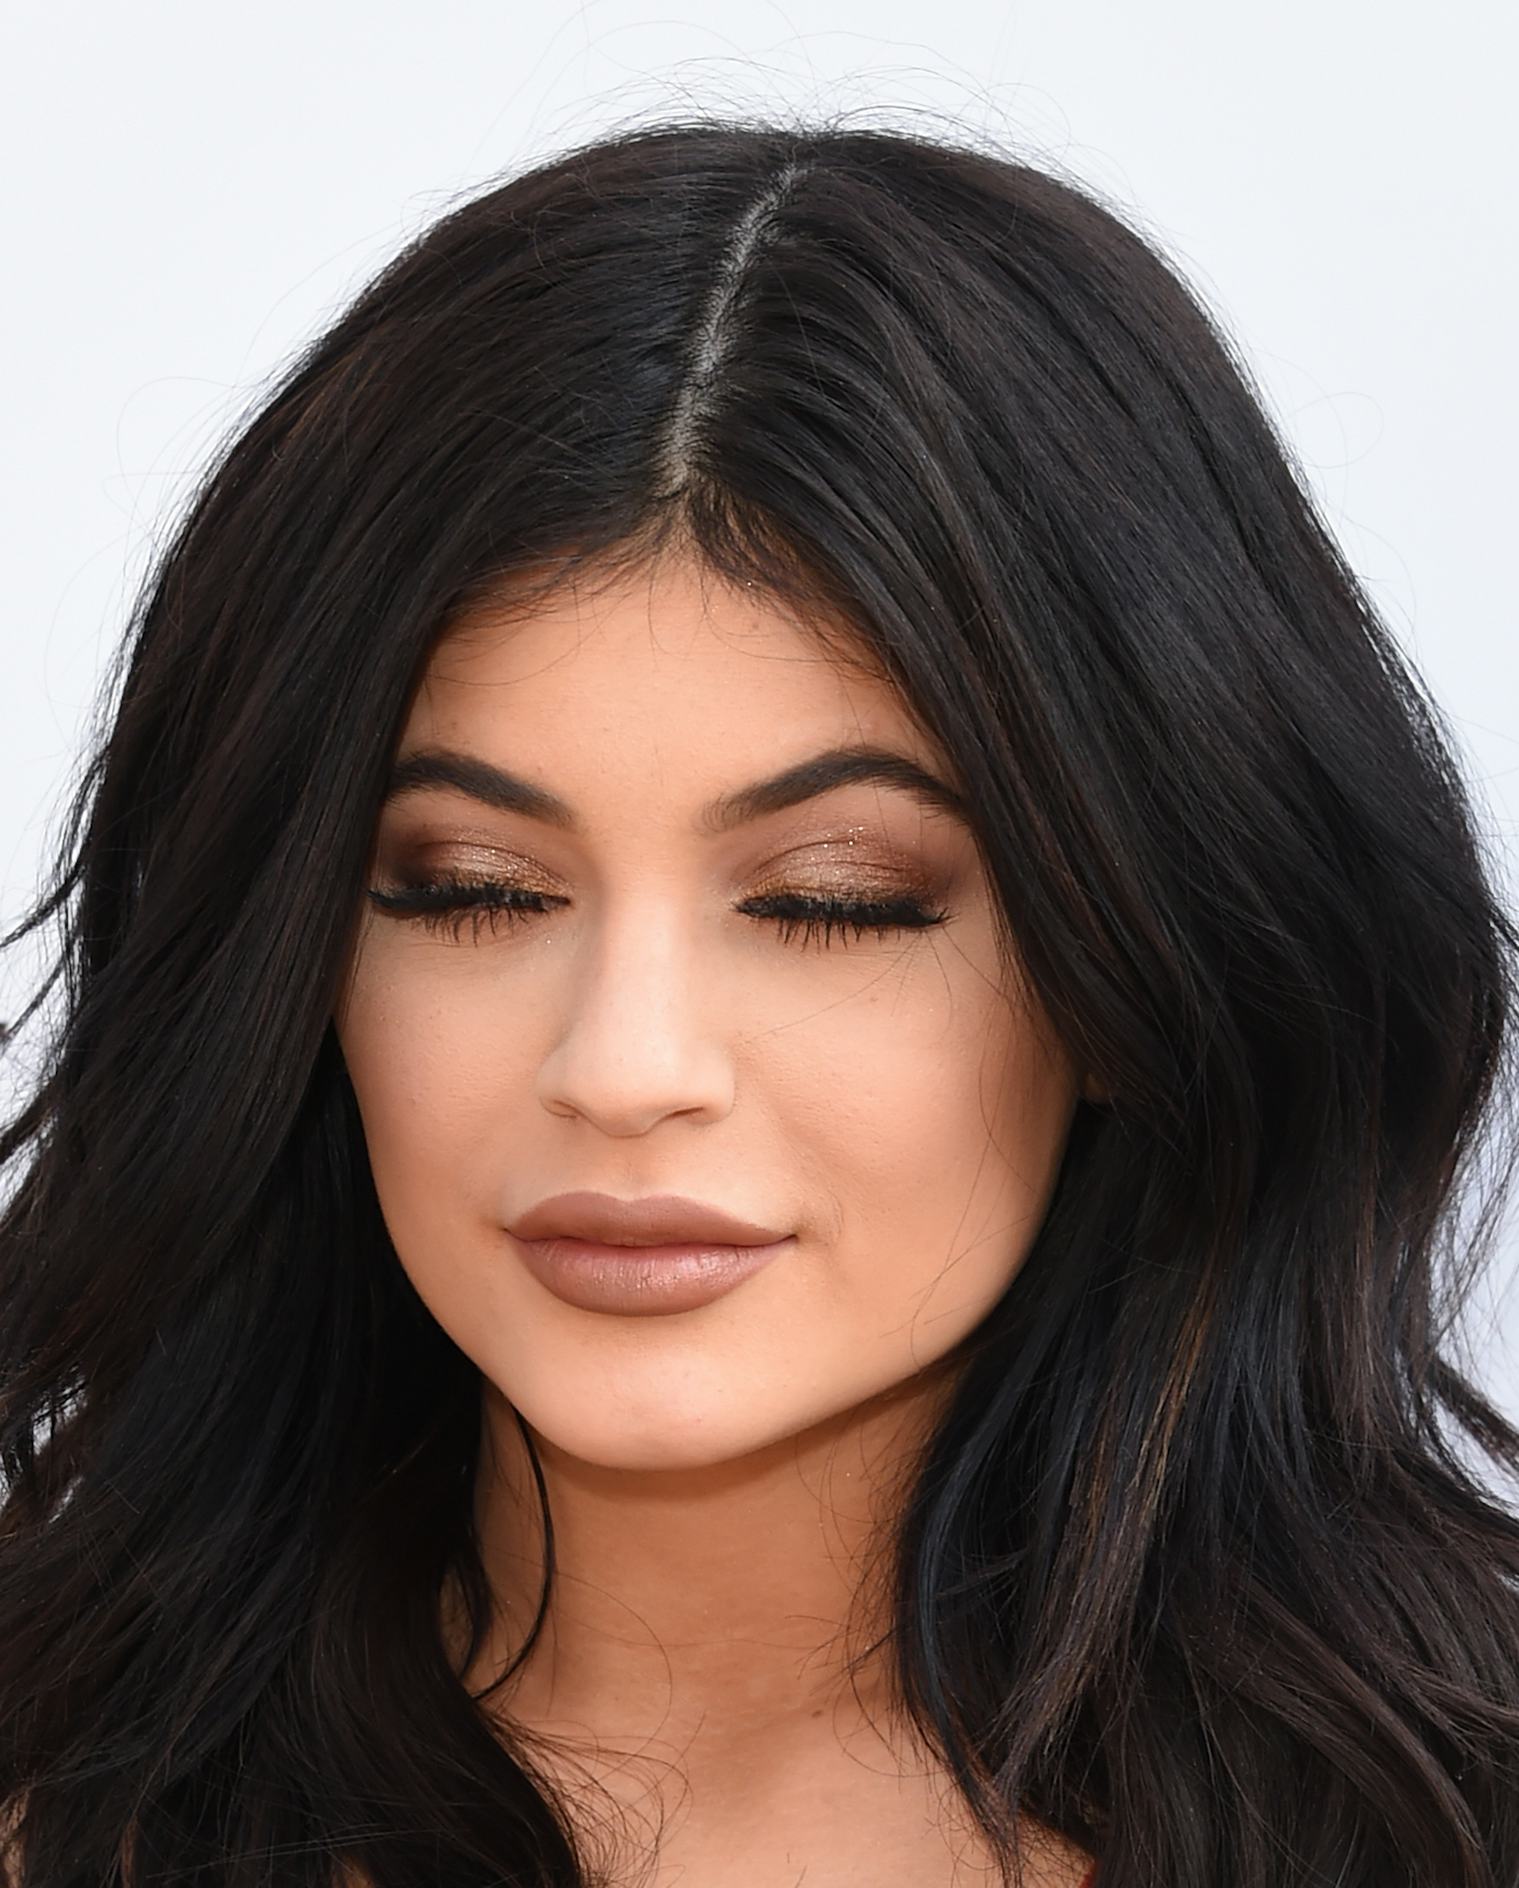 Kylie Jenner Launches TheKylieJenner.Com & It's Full Of Amazing Makeup Tips